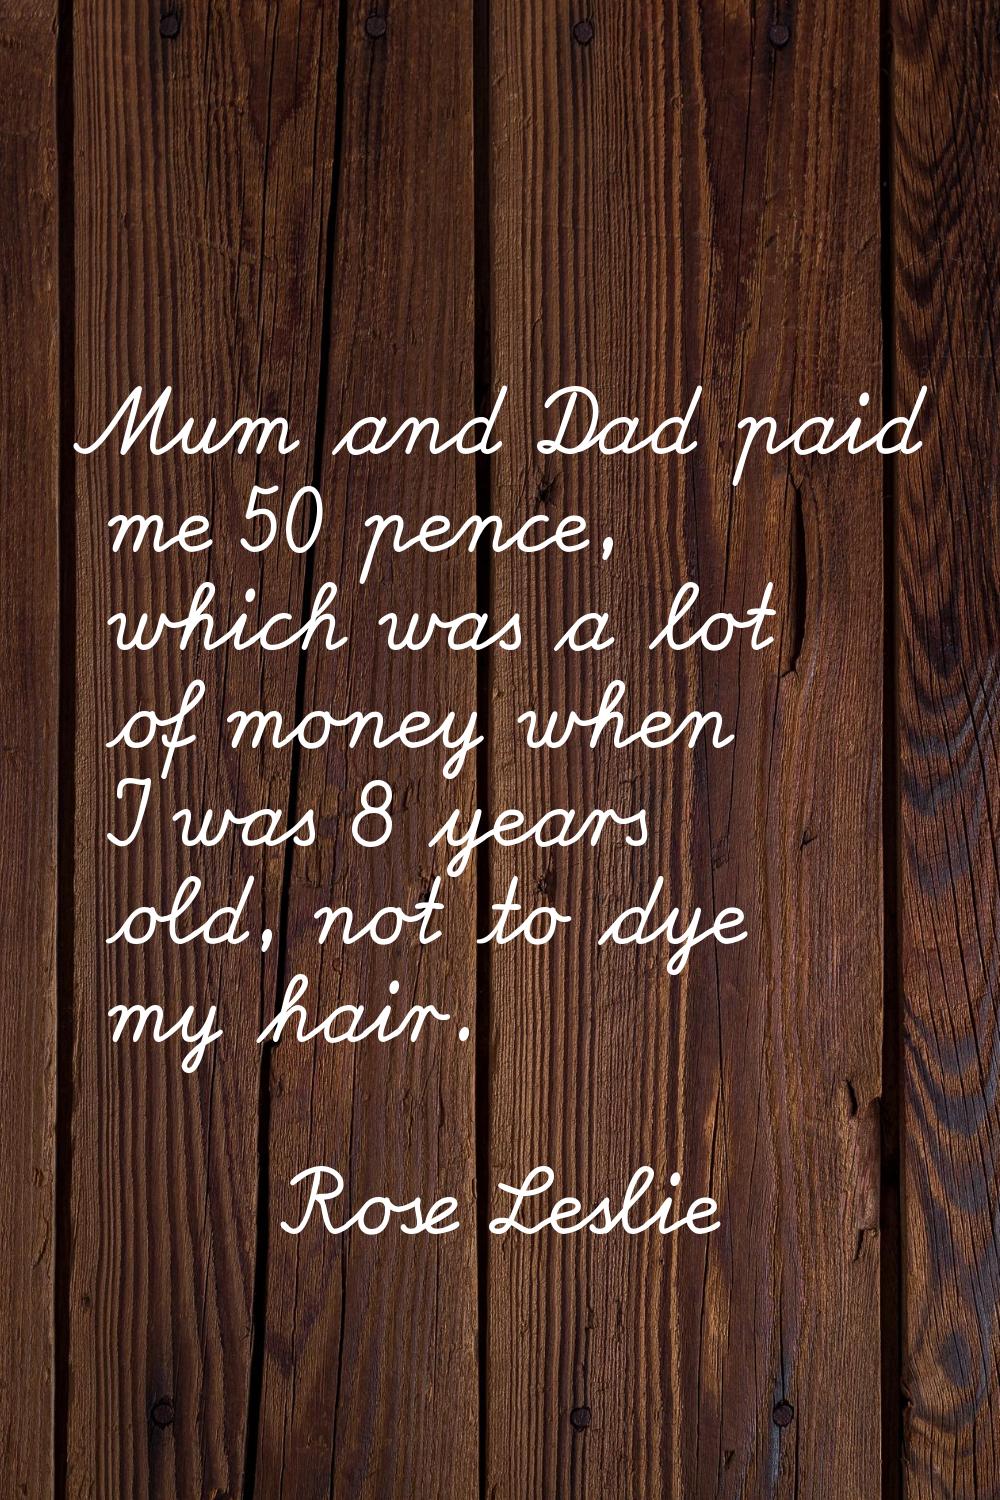 Mum and Dad paid me 50 pence, which was a lot of money when I was 8 years old, not to dye my hair.